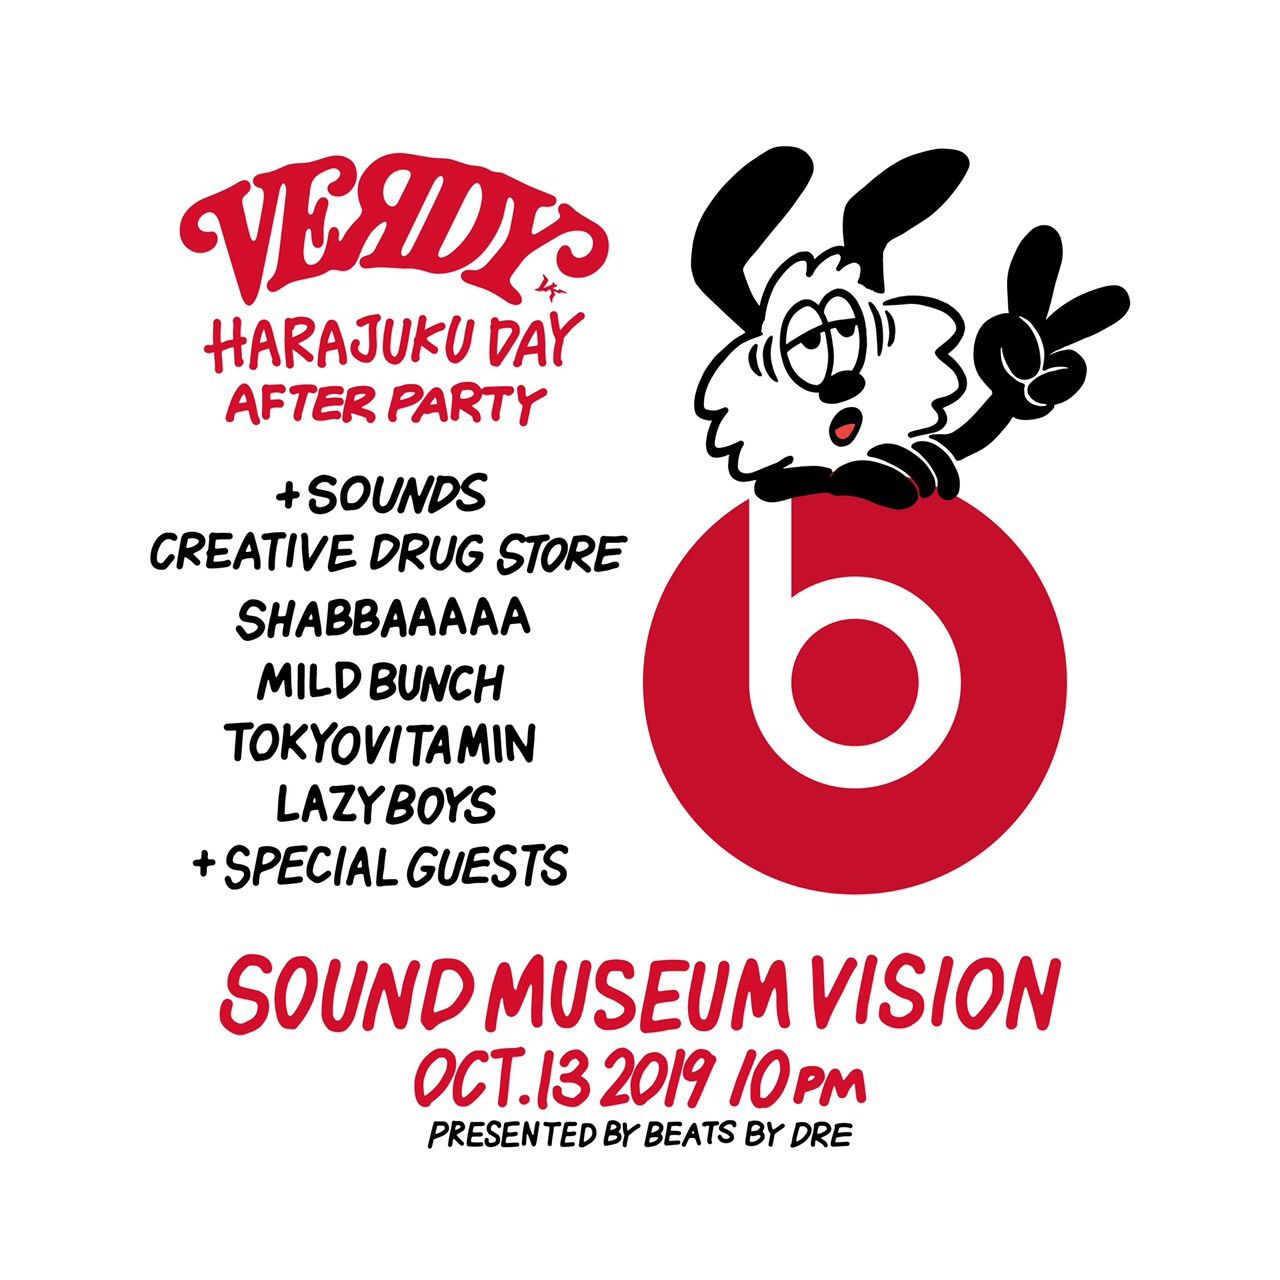 VERDY HARAJUKU DAY AFTER PARTY PRESENTED BY BEATS BY DRE